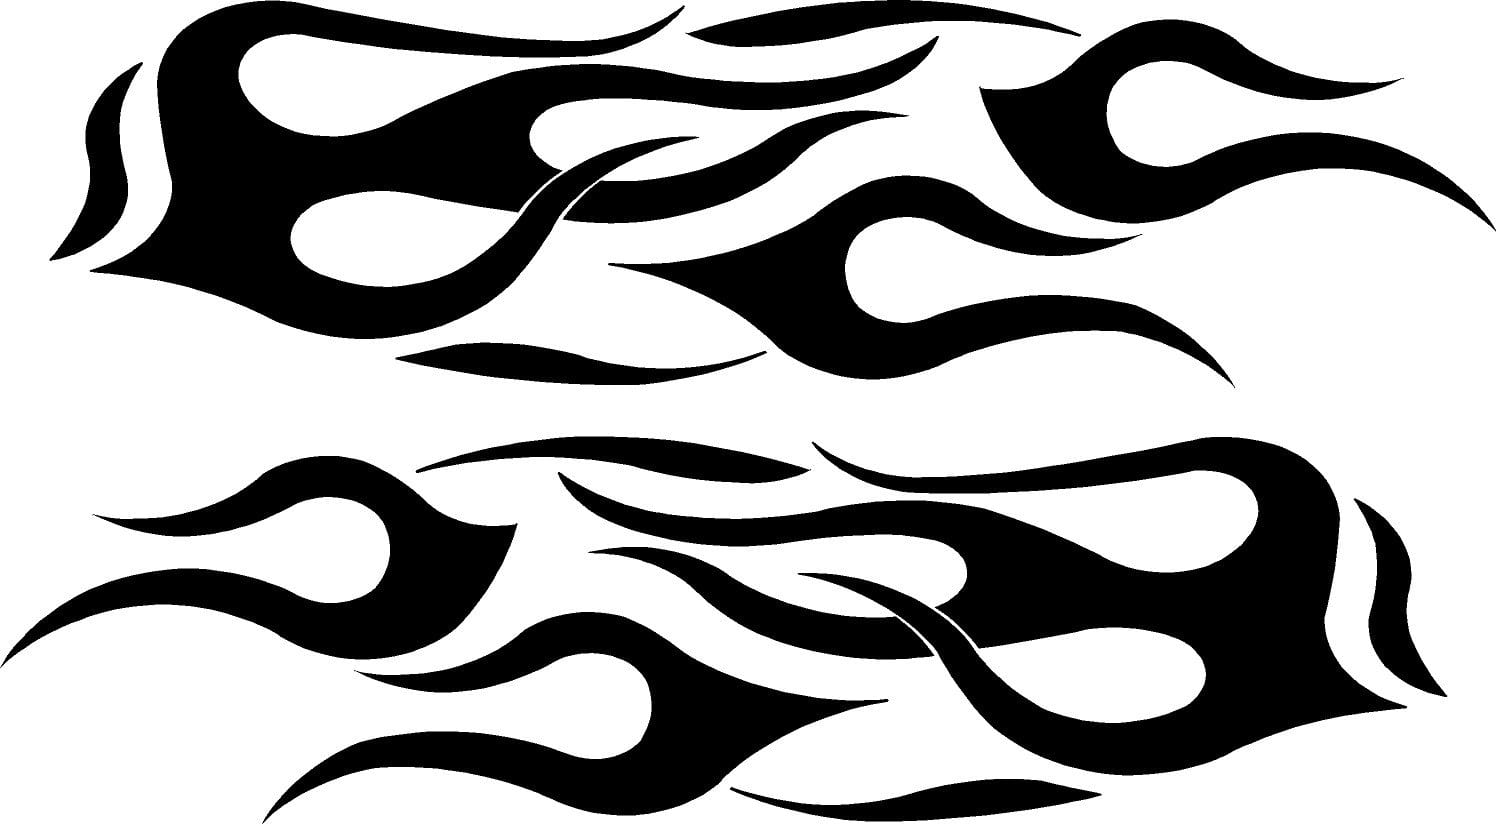 Flame Vinyl Side Decals Style #1 Xtreme Digital GraphiX